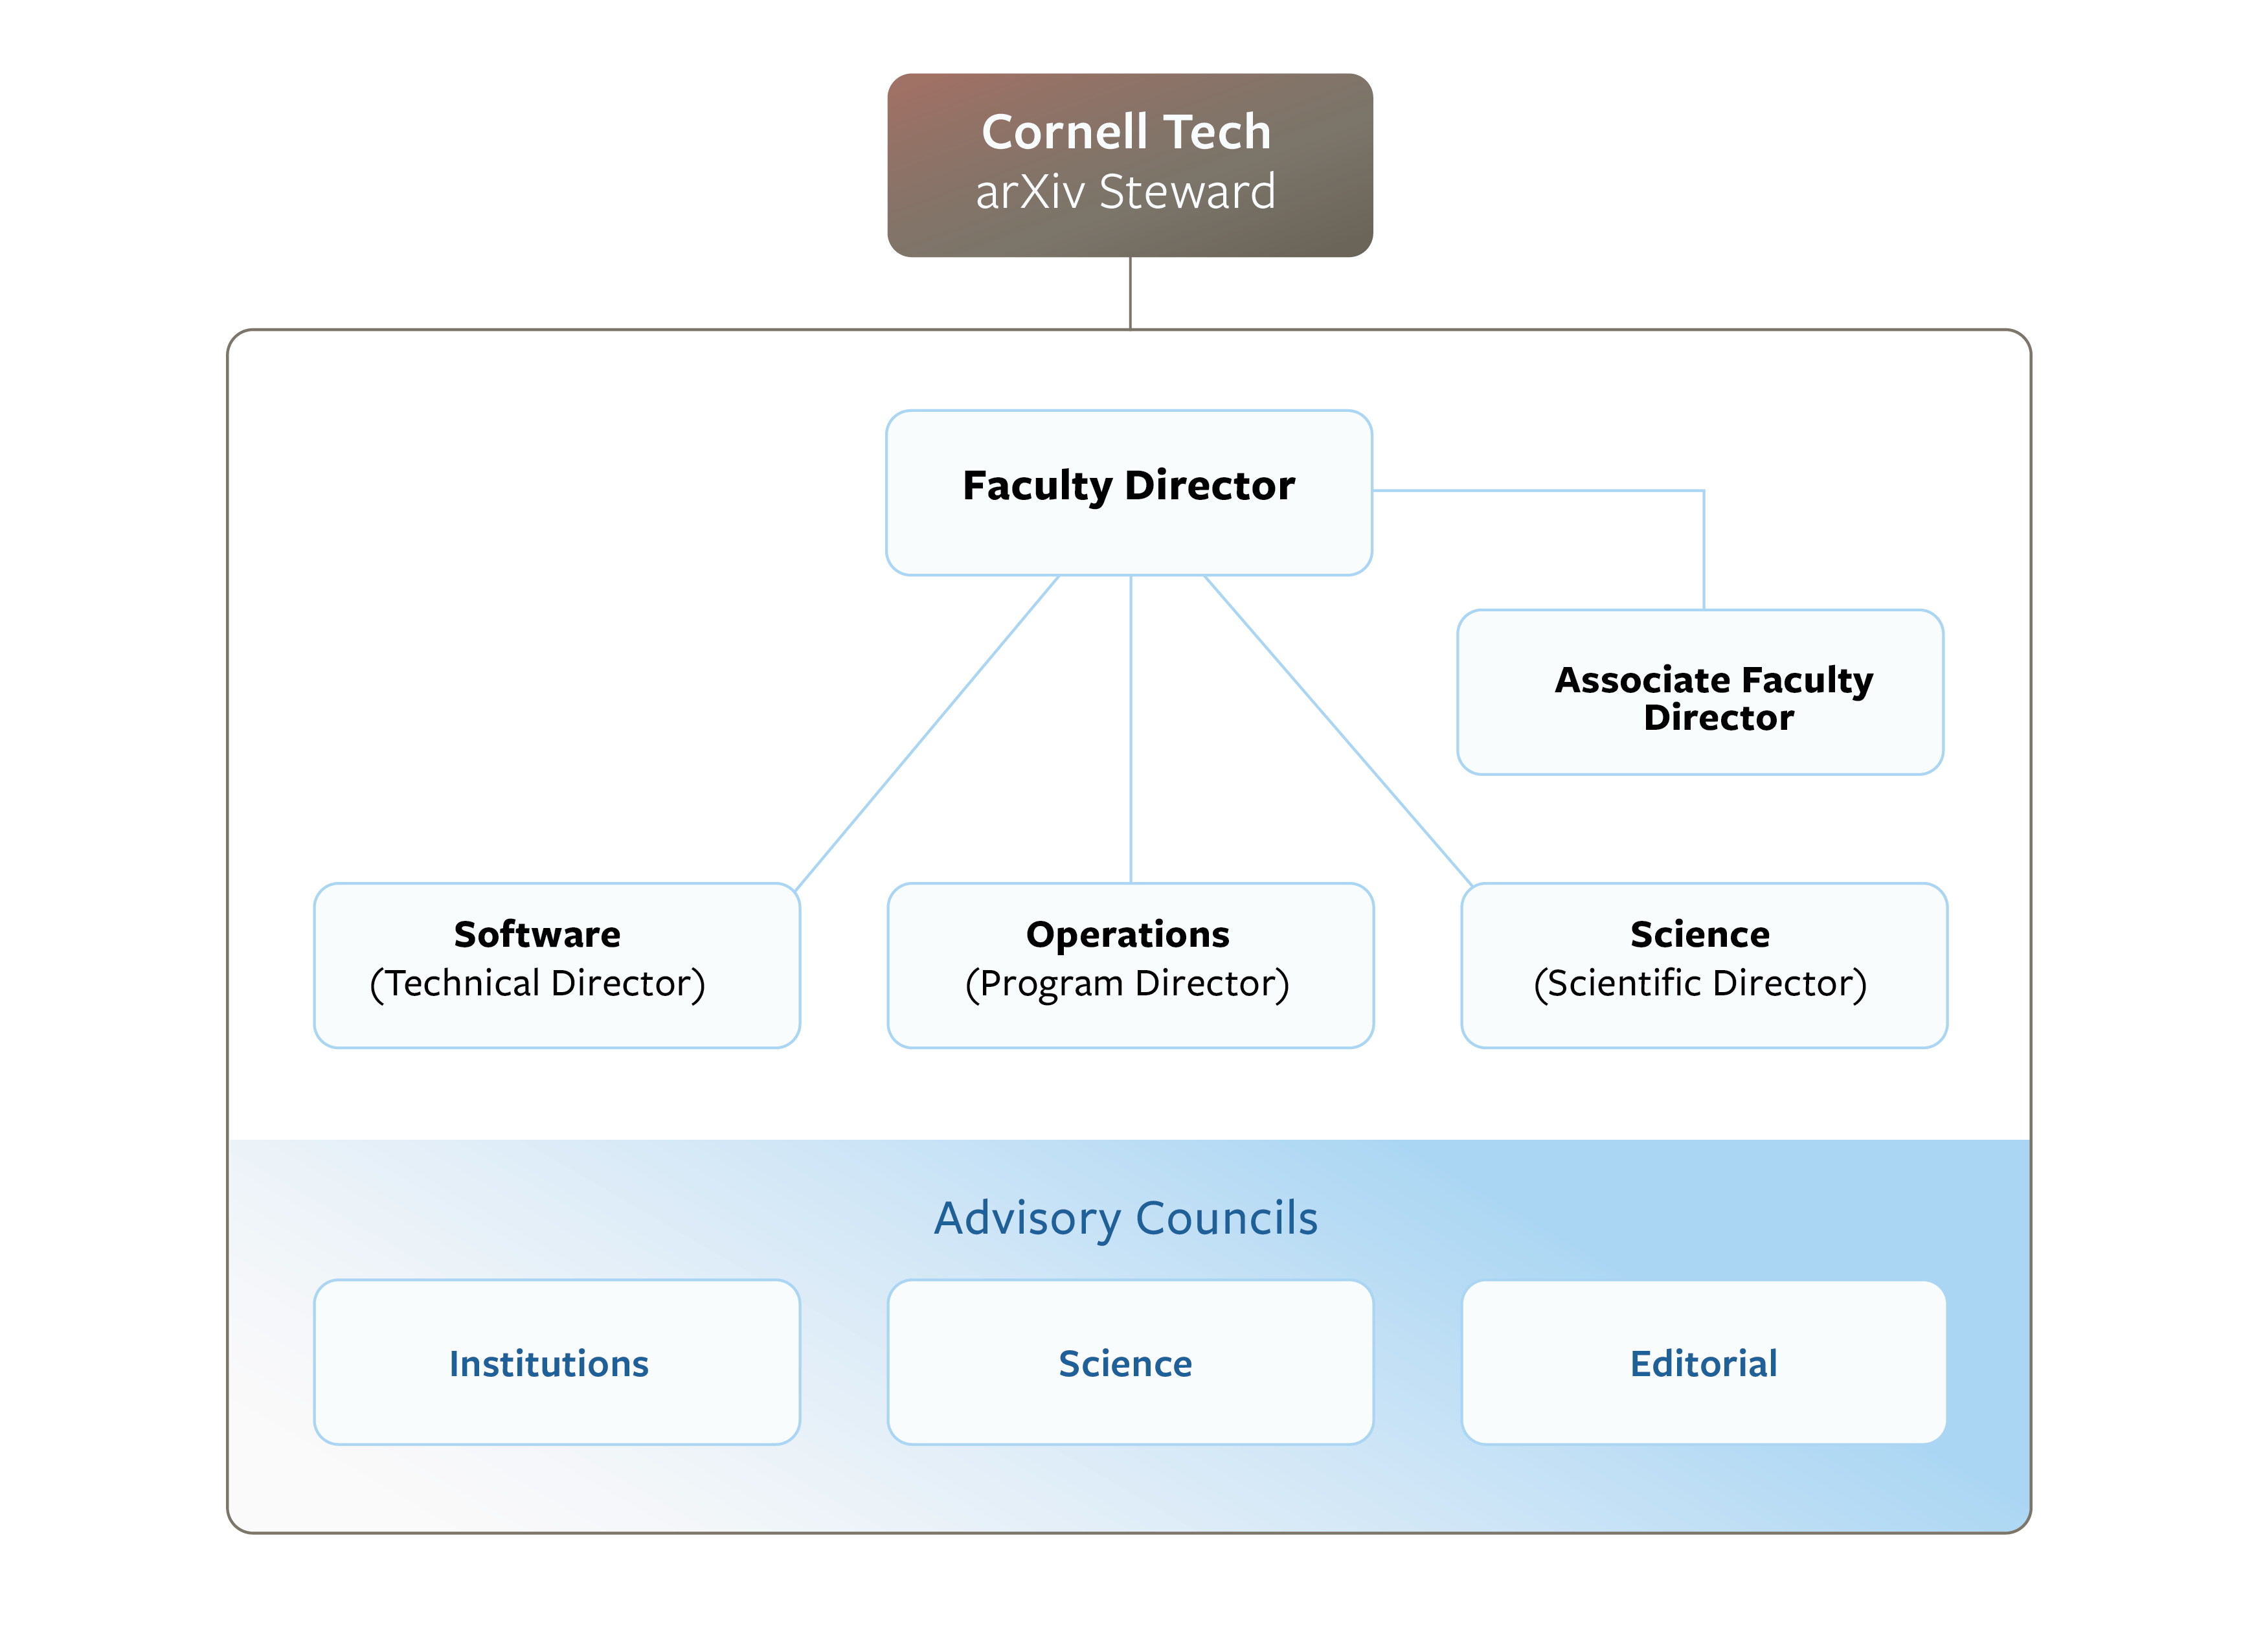 arXiv org chart showing that the directors of Technology, Science, and Operations report to the Faculty Director, as does the Associate Faculty Director. arXiv also has 3 advisory councils for Institutions, Science, and Editorial. The entire organization is under the stewardship of Cornell Tech